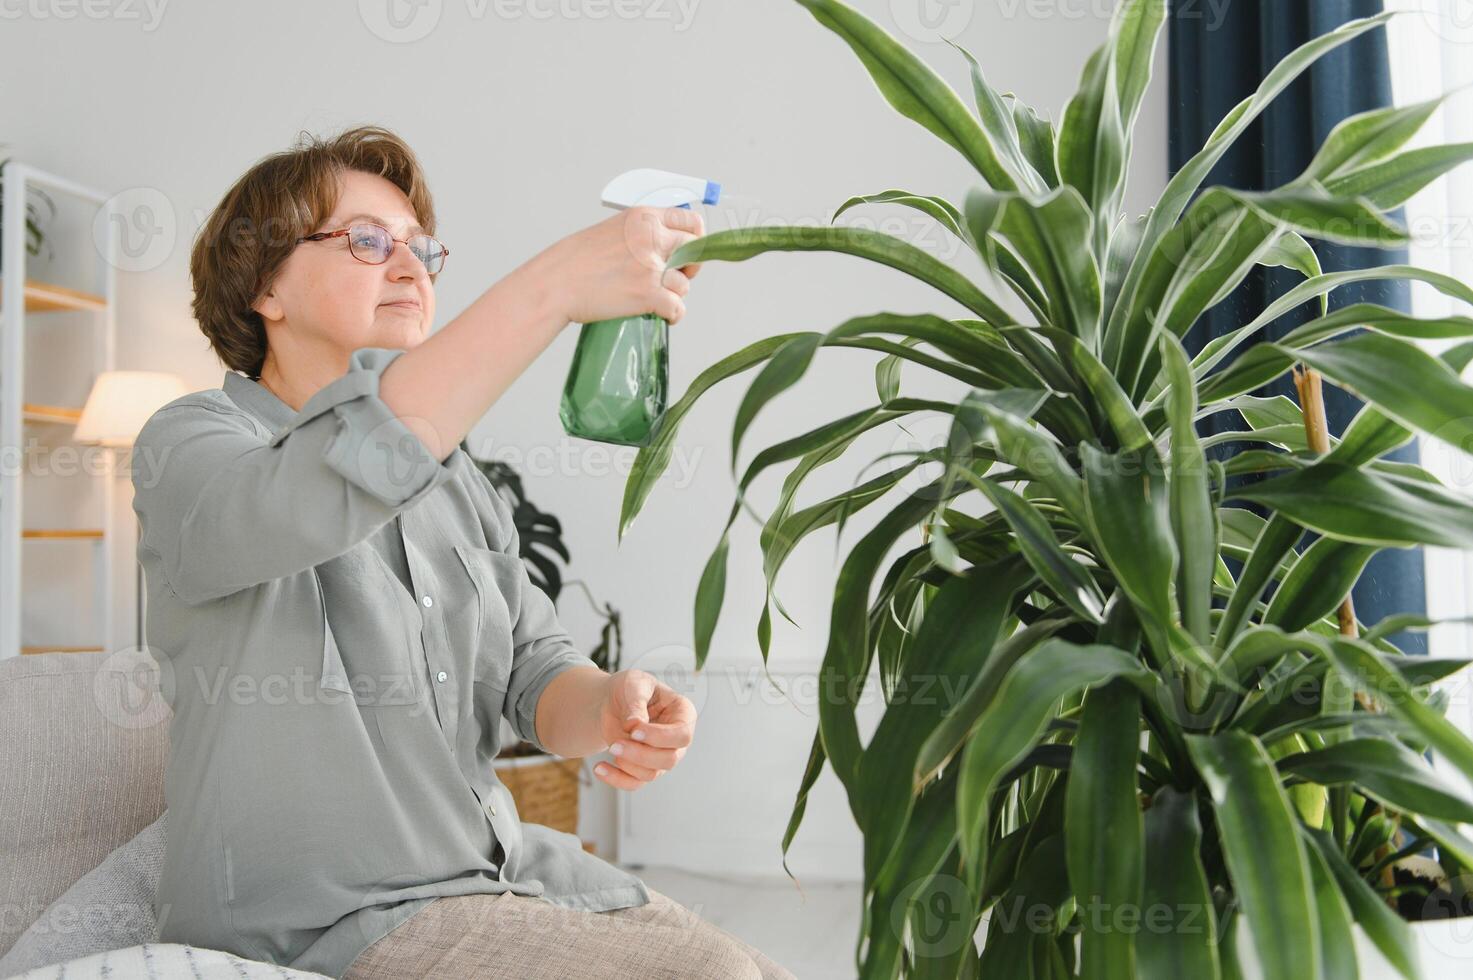 Home gardening. Happy senior woman with glasses caring for the plant. Smiling elderly woman spraying aloe vera with a spray bottle. Indoor care and love for indoor plants. photo